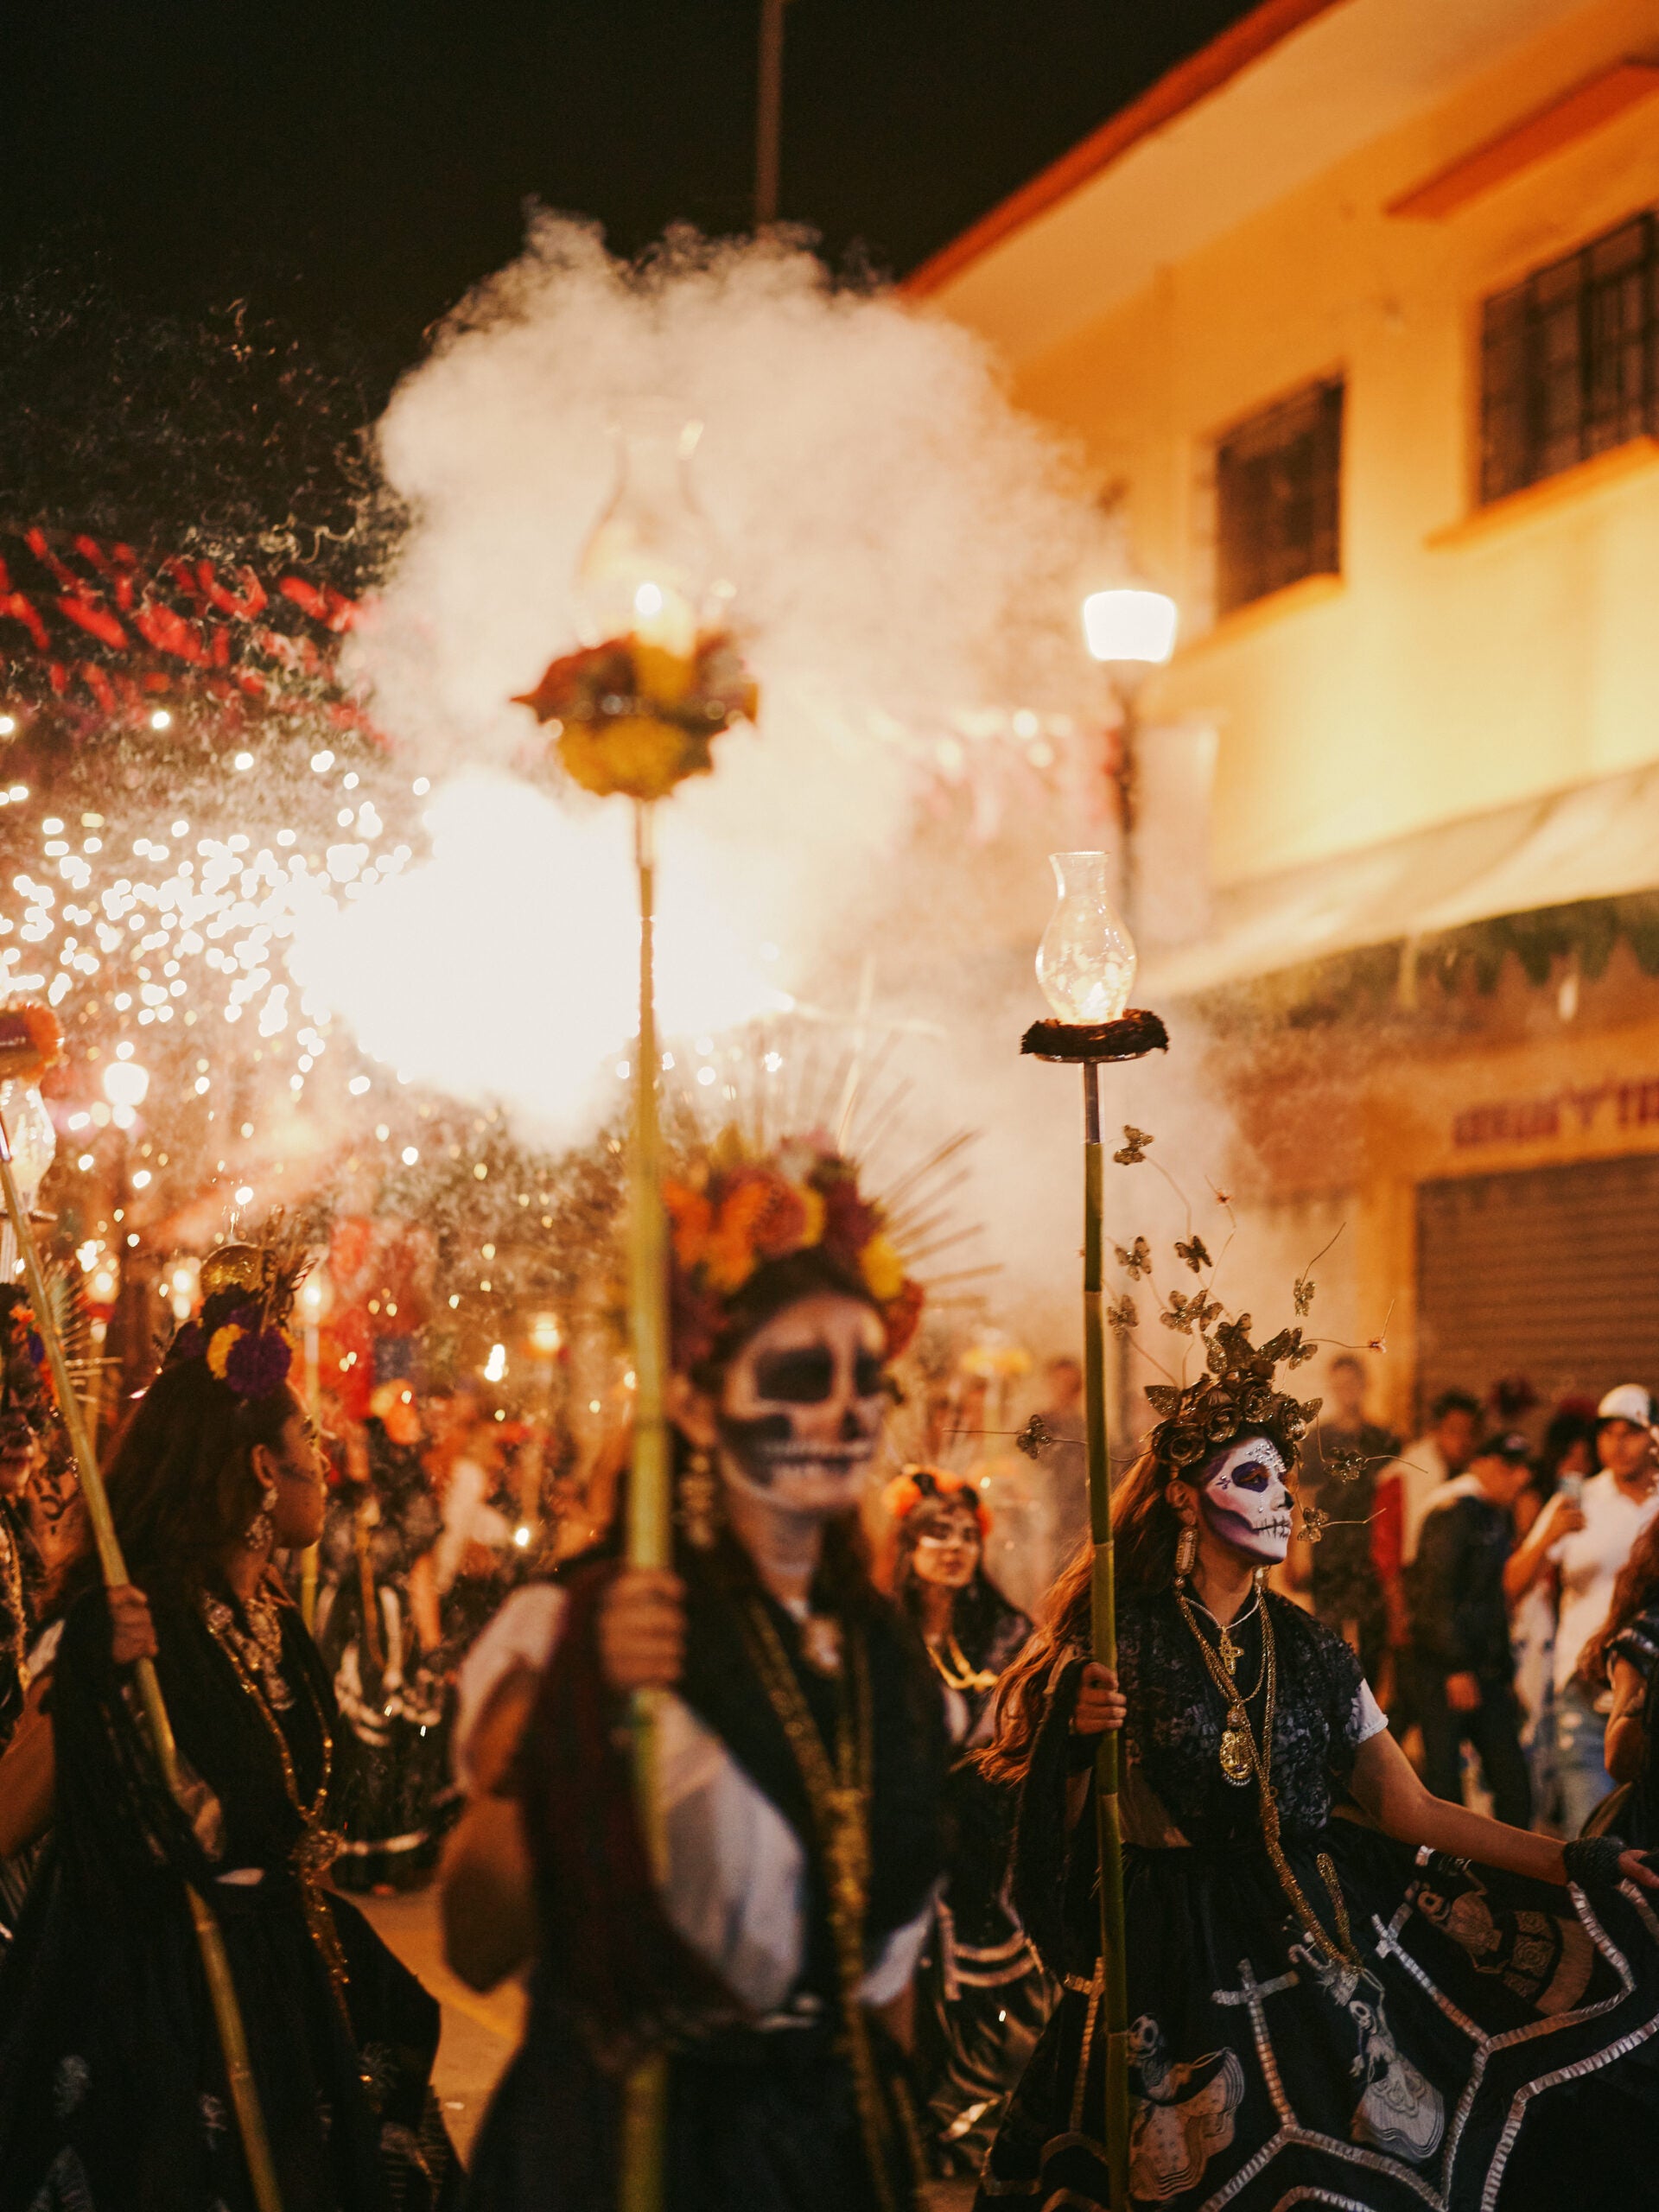 People parading down street holding sparklers and wearing face paint for Day of the Dead in Mexico.